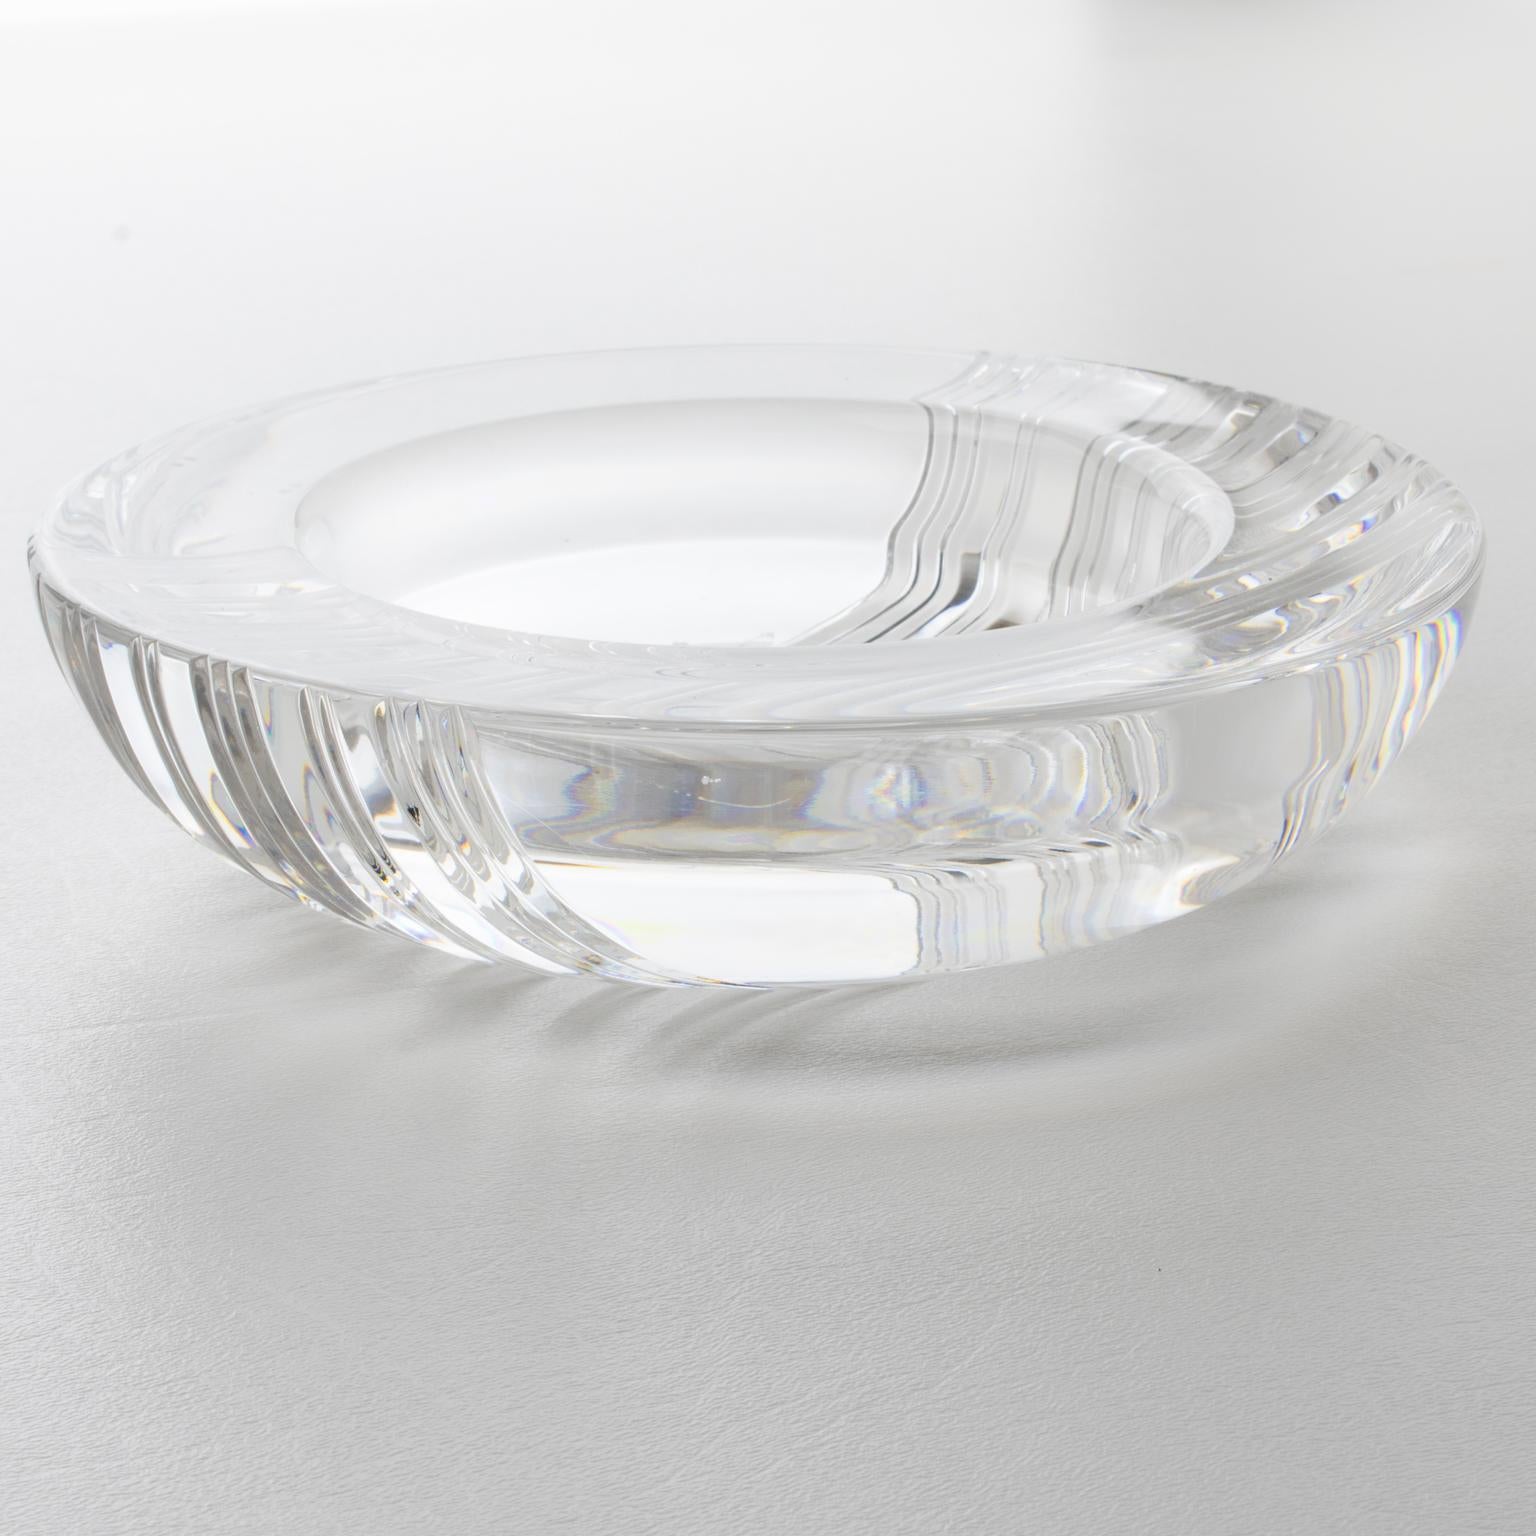 French Christian Dior Crystal Cigar Ashtray Bowl Dish Catchall Vide Poche For Sale